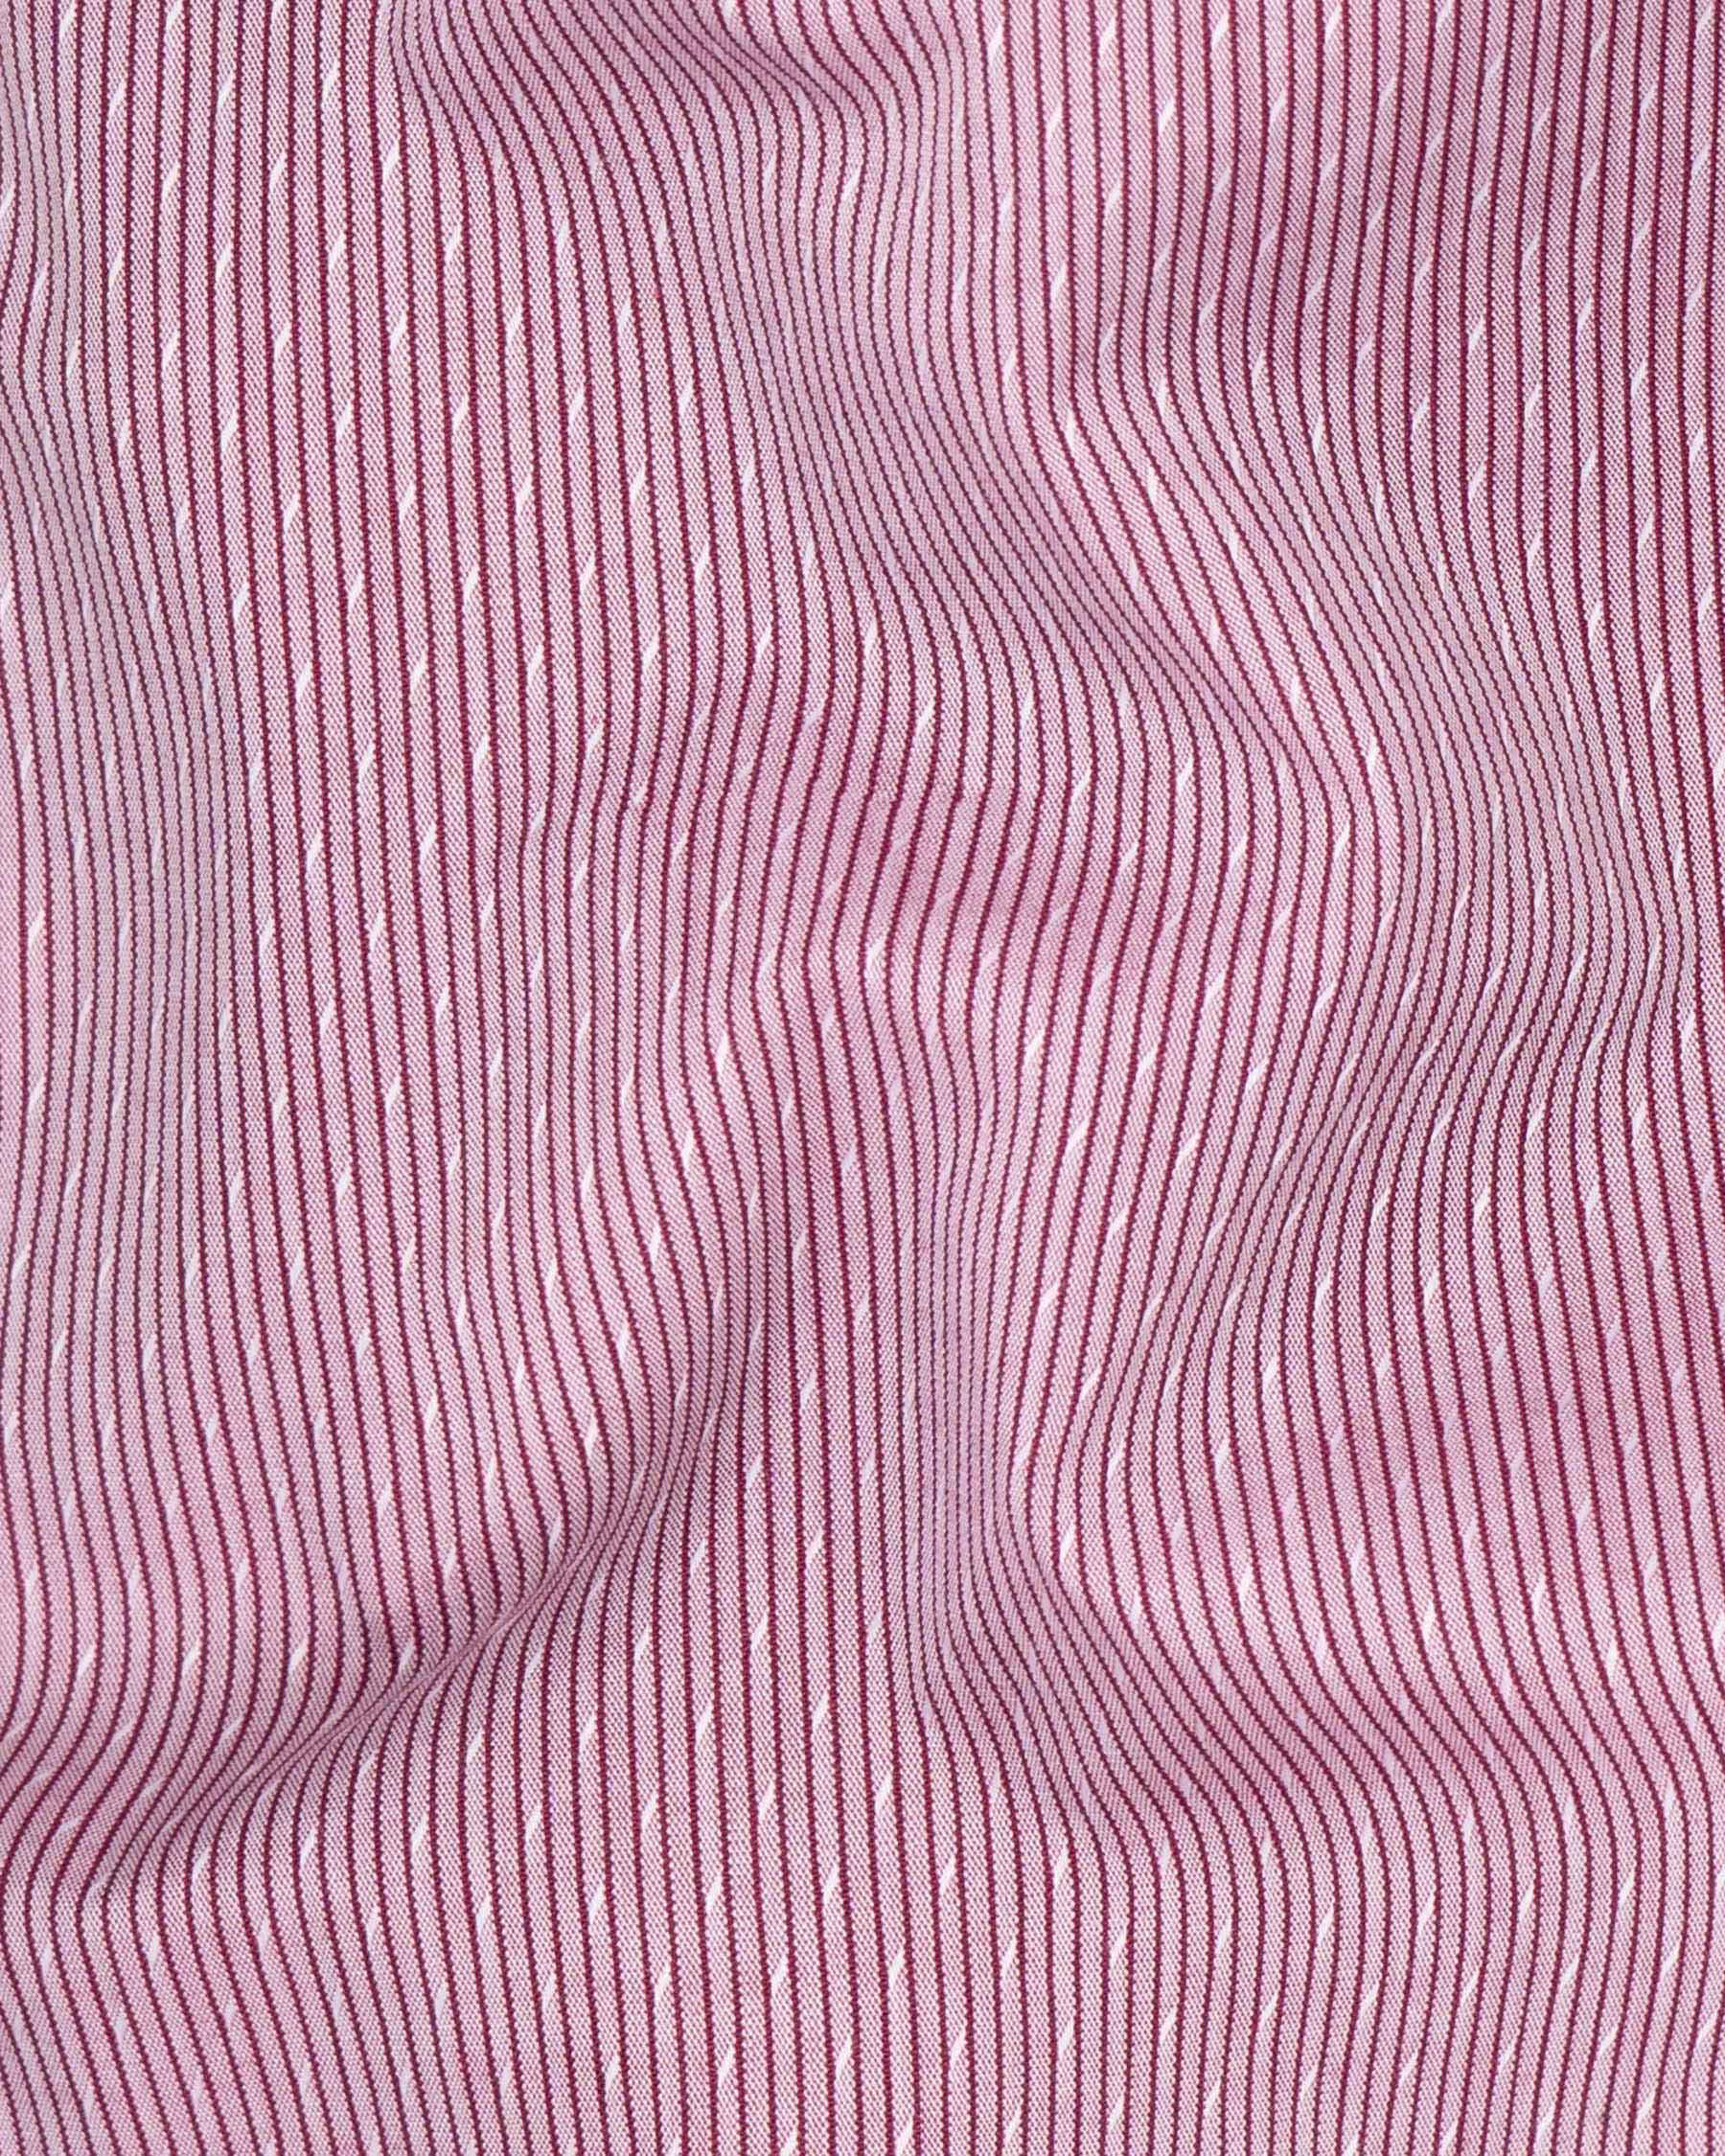 Lily Flare Pinstriped Dobby Textured Premium Giza Cotton Shirt 6106-CA-38, 6106-CA-H-38, 6106-CA-39, 6106-CA-H-39, 6106-CA-40, 6106-CA-H-40, 6106-CA-42, 6106-CA-H-42, 6106-CA-44, 6106-CA-H-44, 6106-CA-46, 6106-CA-H-46, 6106-CA-48, 6106-CA-H-48, 6106-CA-50, 6106-CA-H-50, 6106-CA-52, 6106-CA-H-52